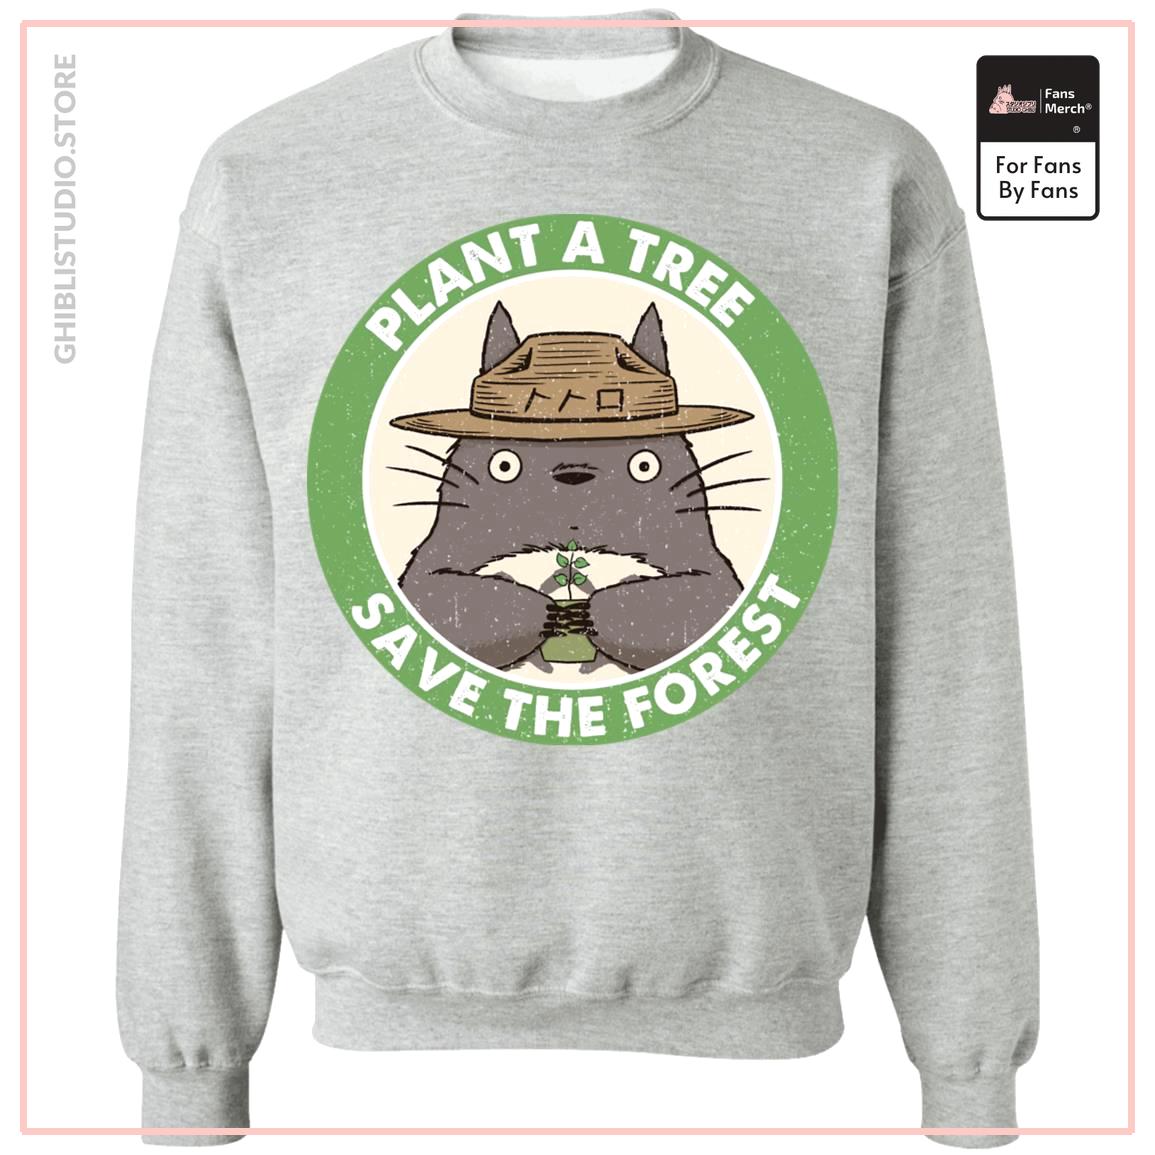 My Neighbor Totoro - Plant a Tree Save the Forest Sweatshirt